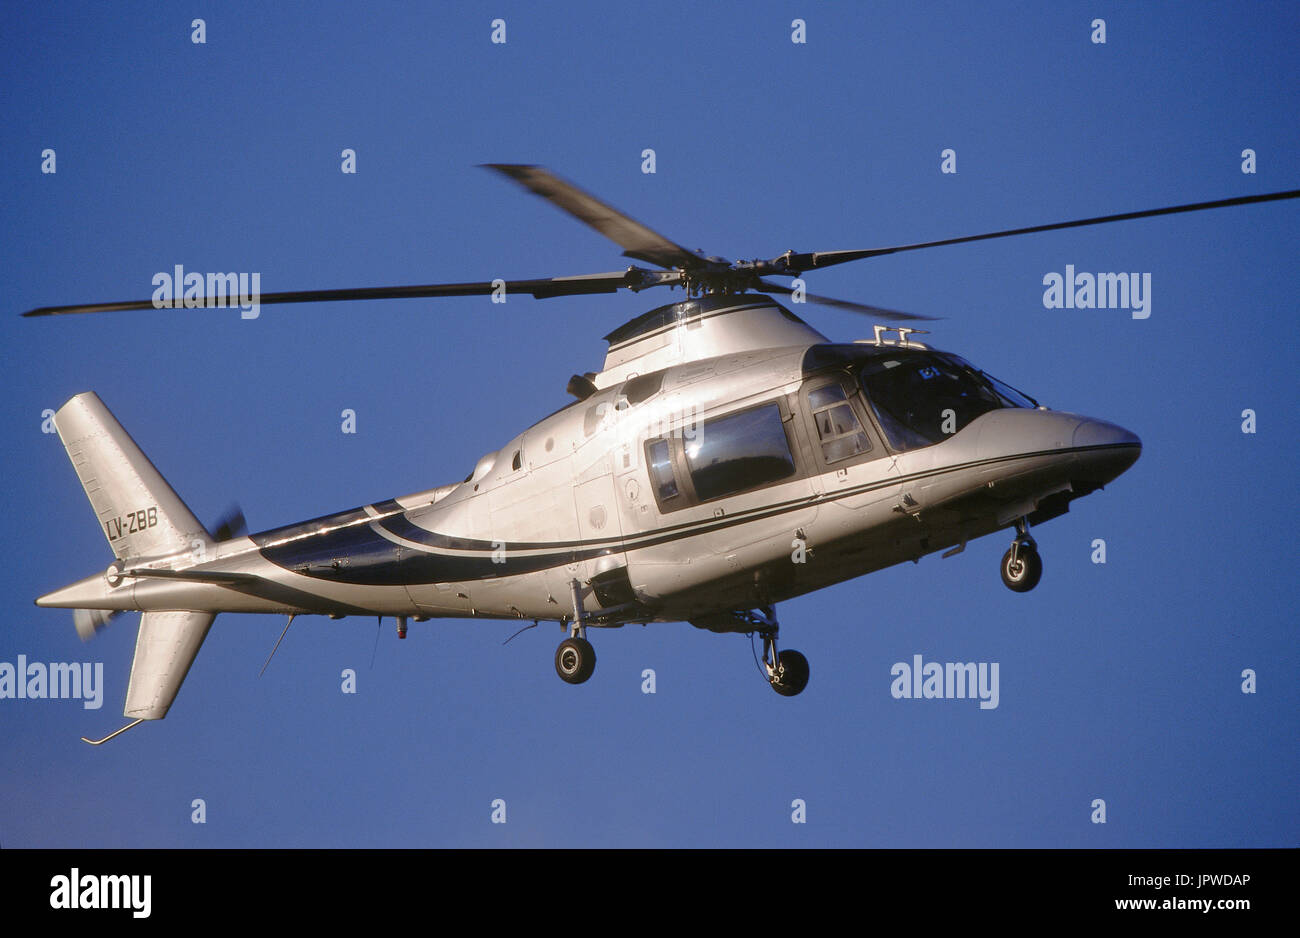 Agista A109C flying enroute Stock Photo